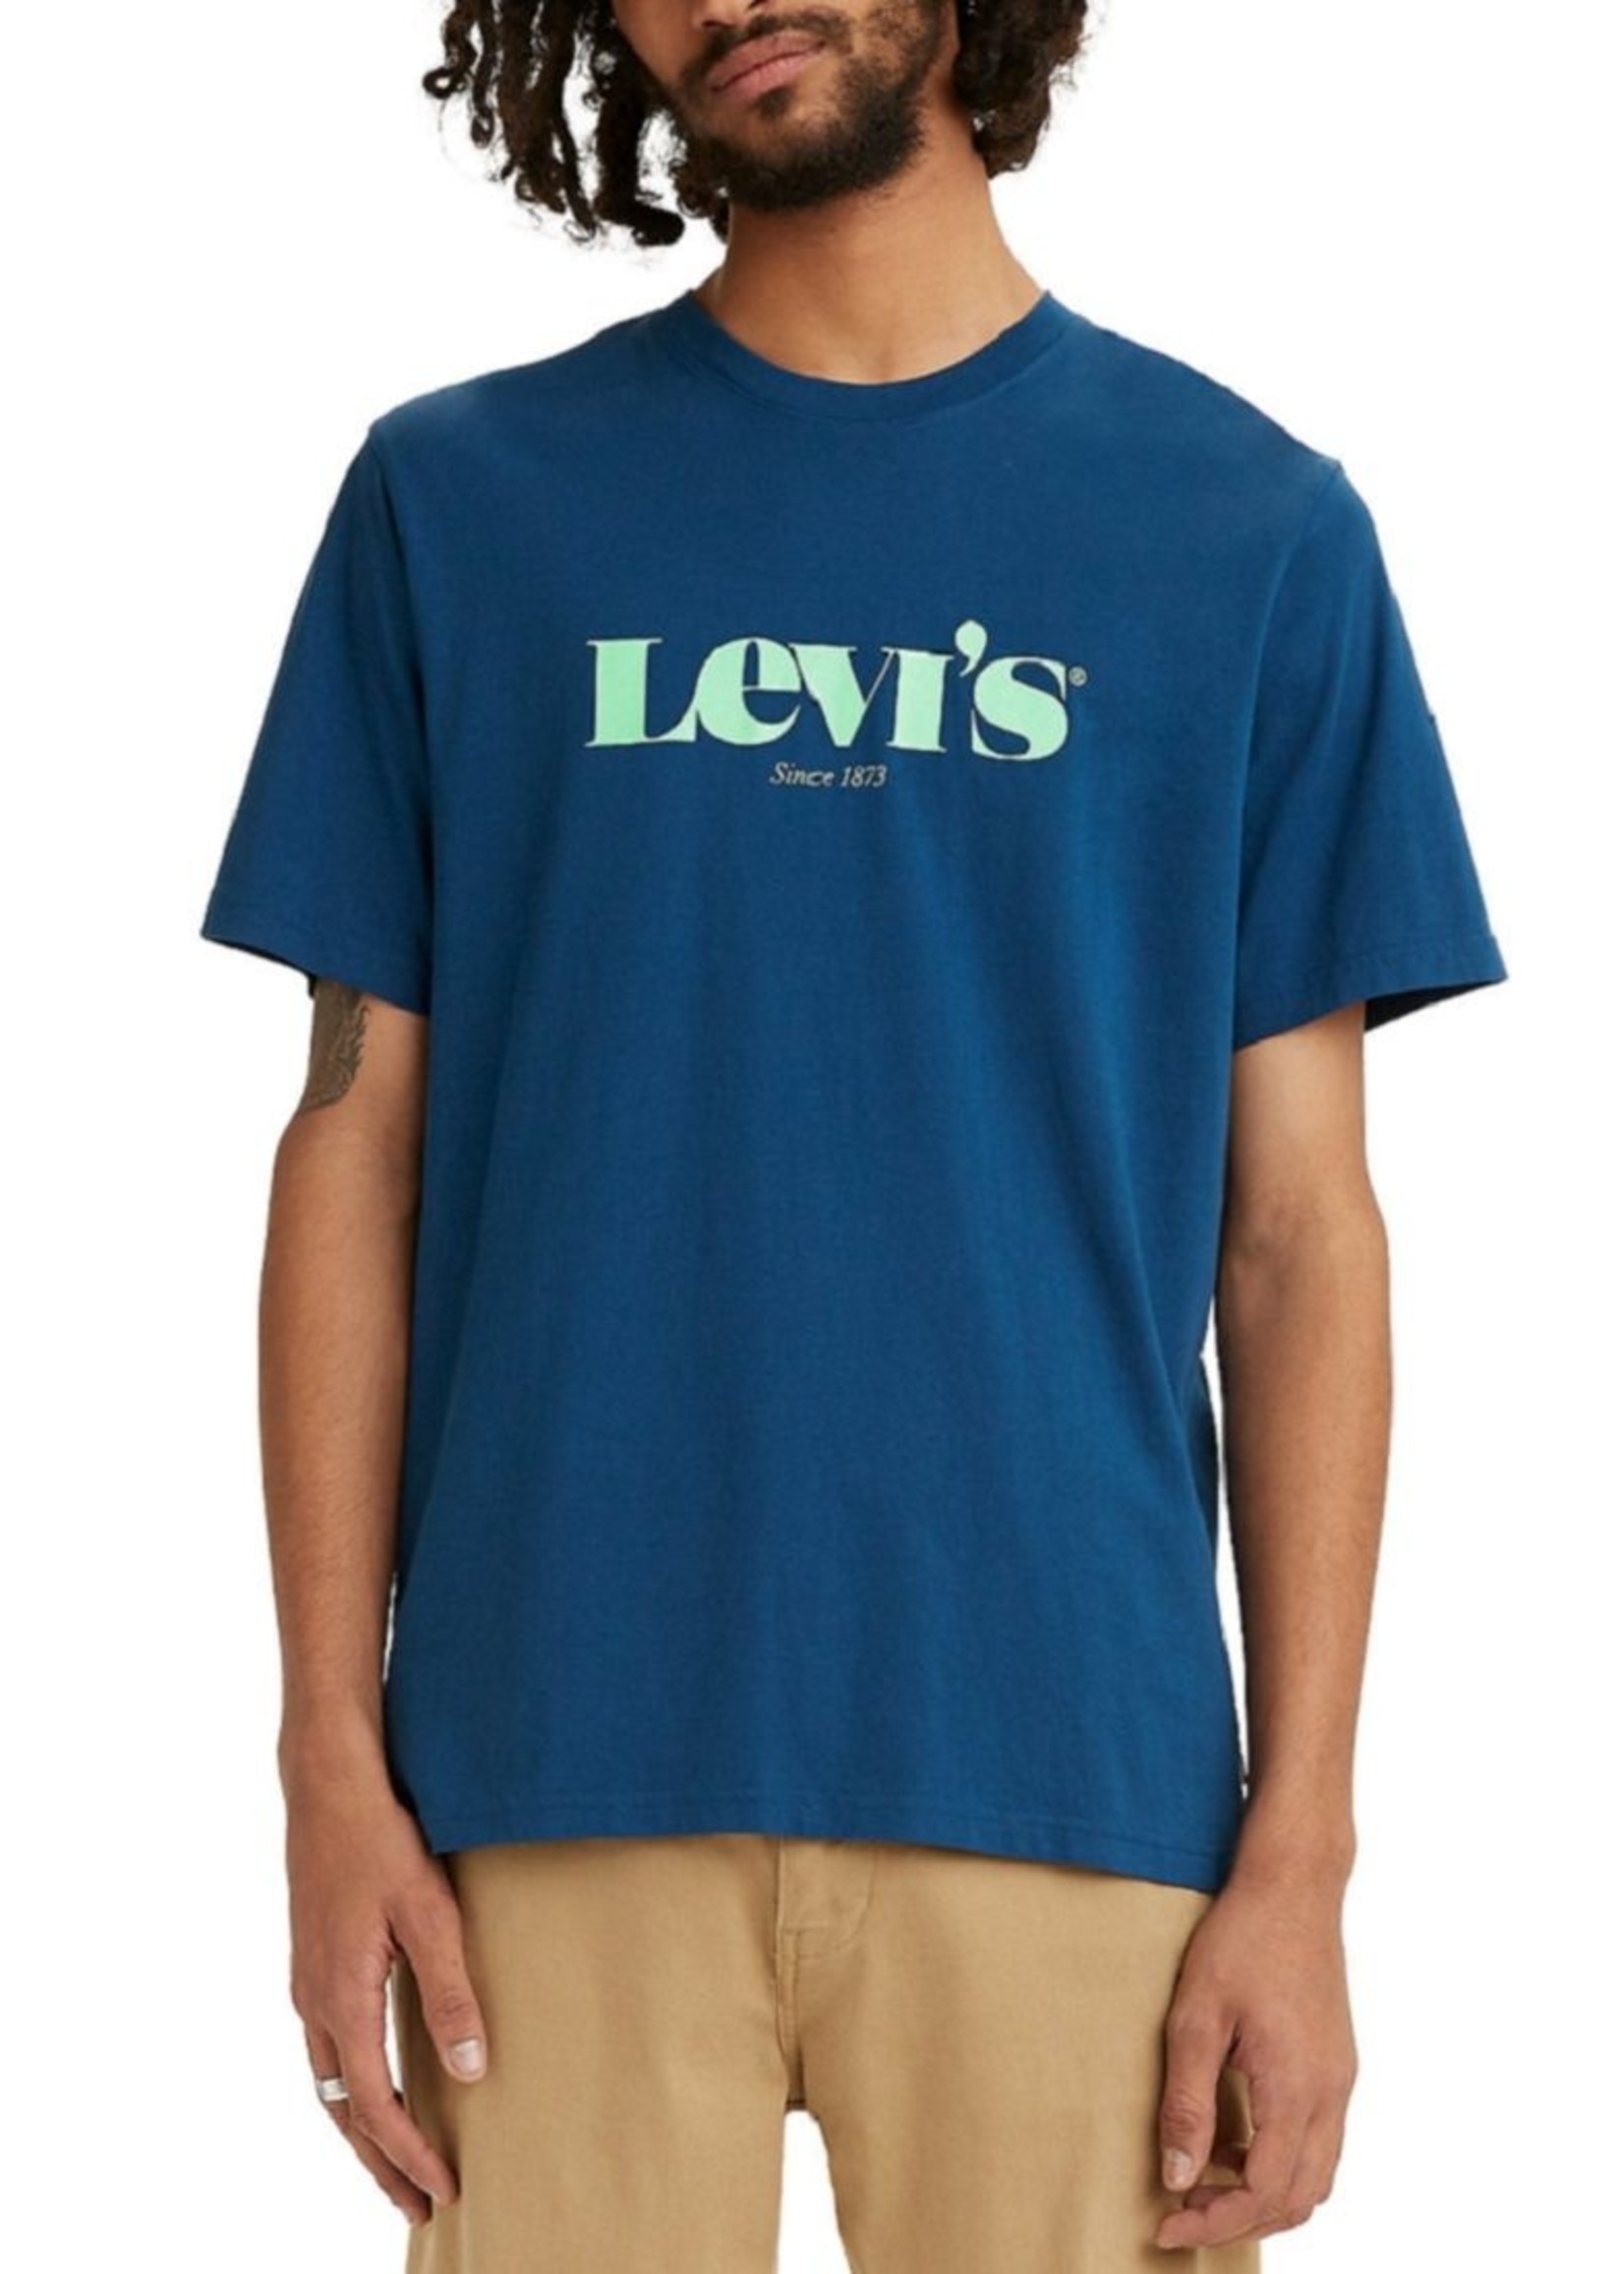 Levi Levi's Relaxed Fit Tee